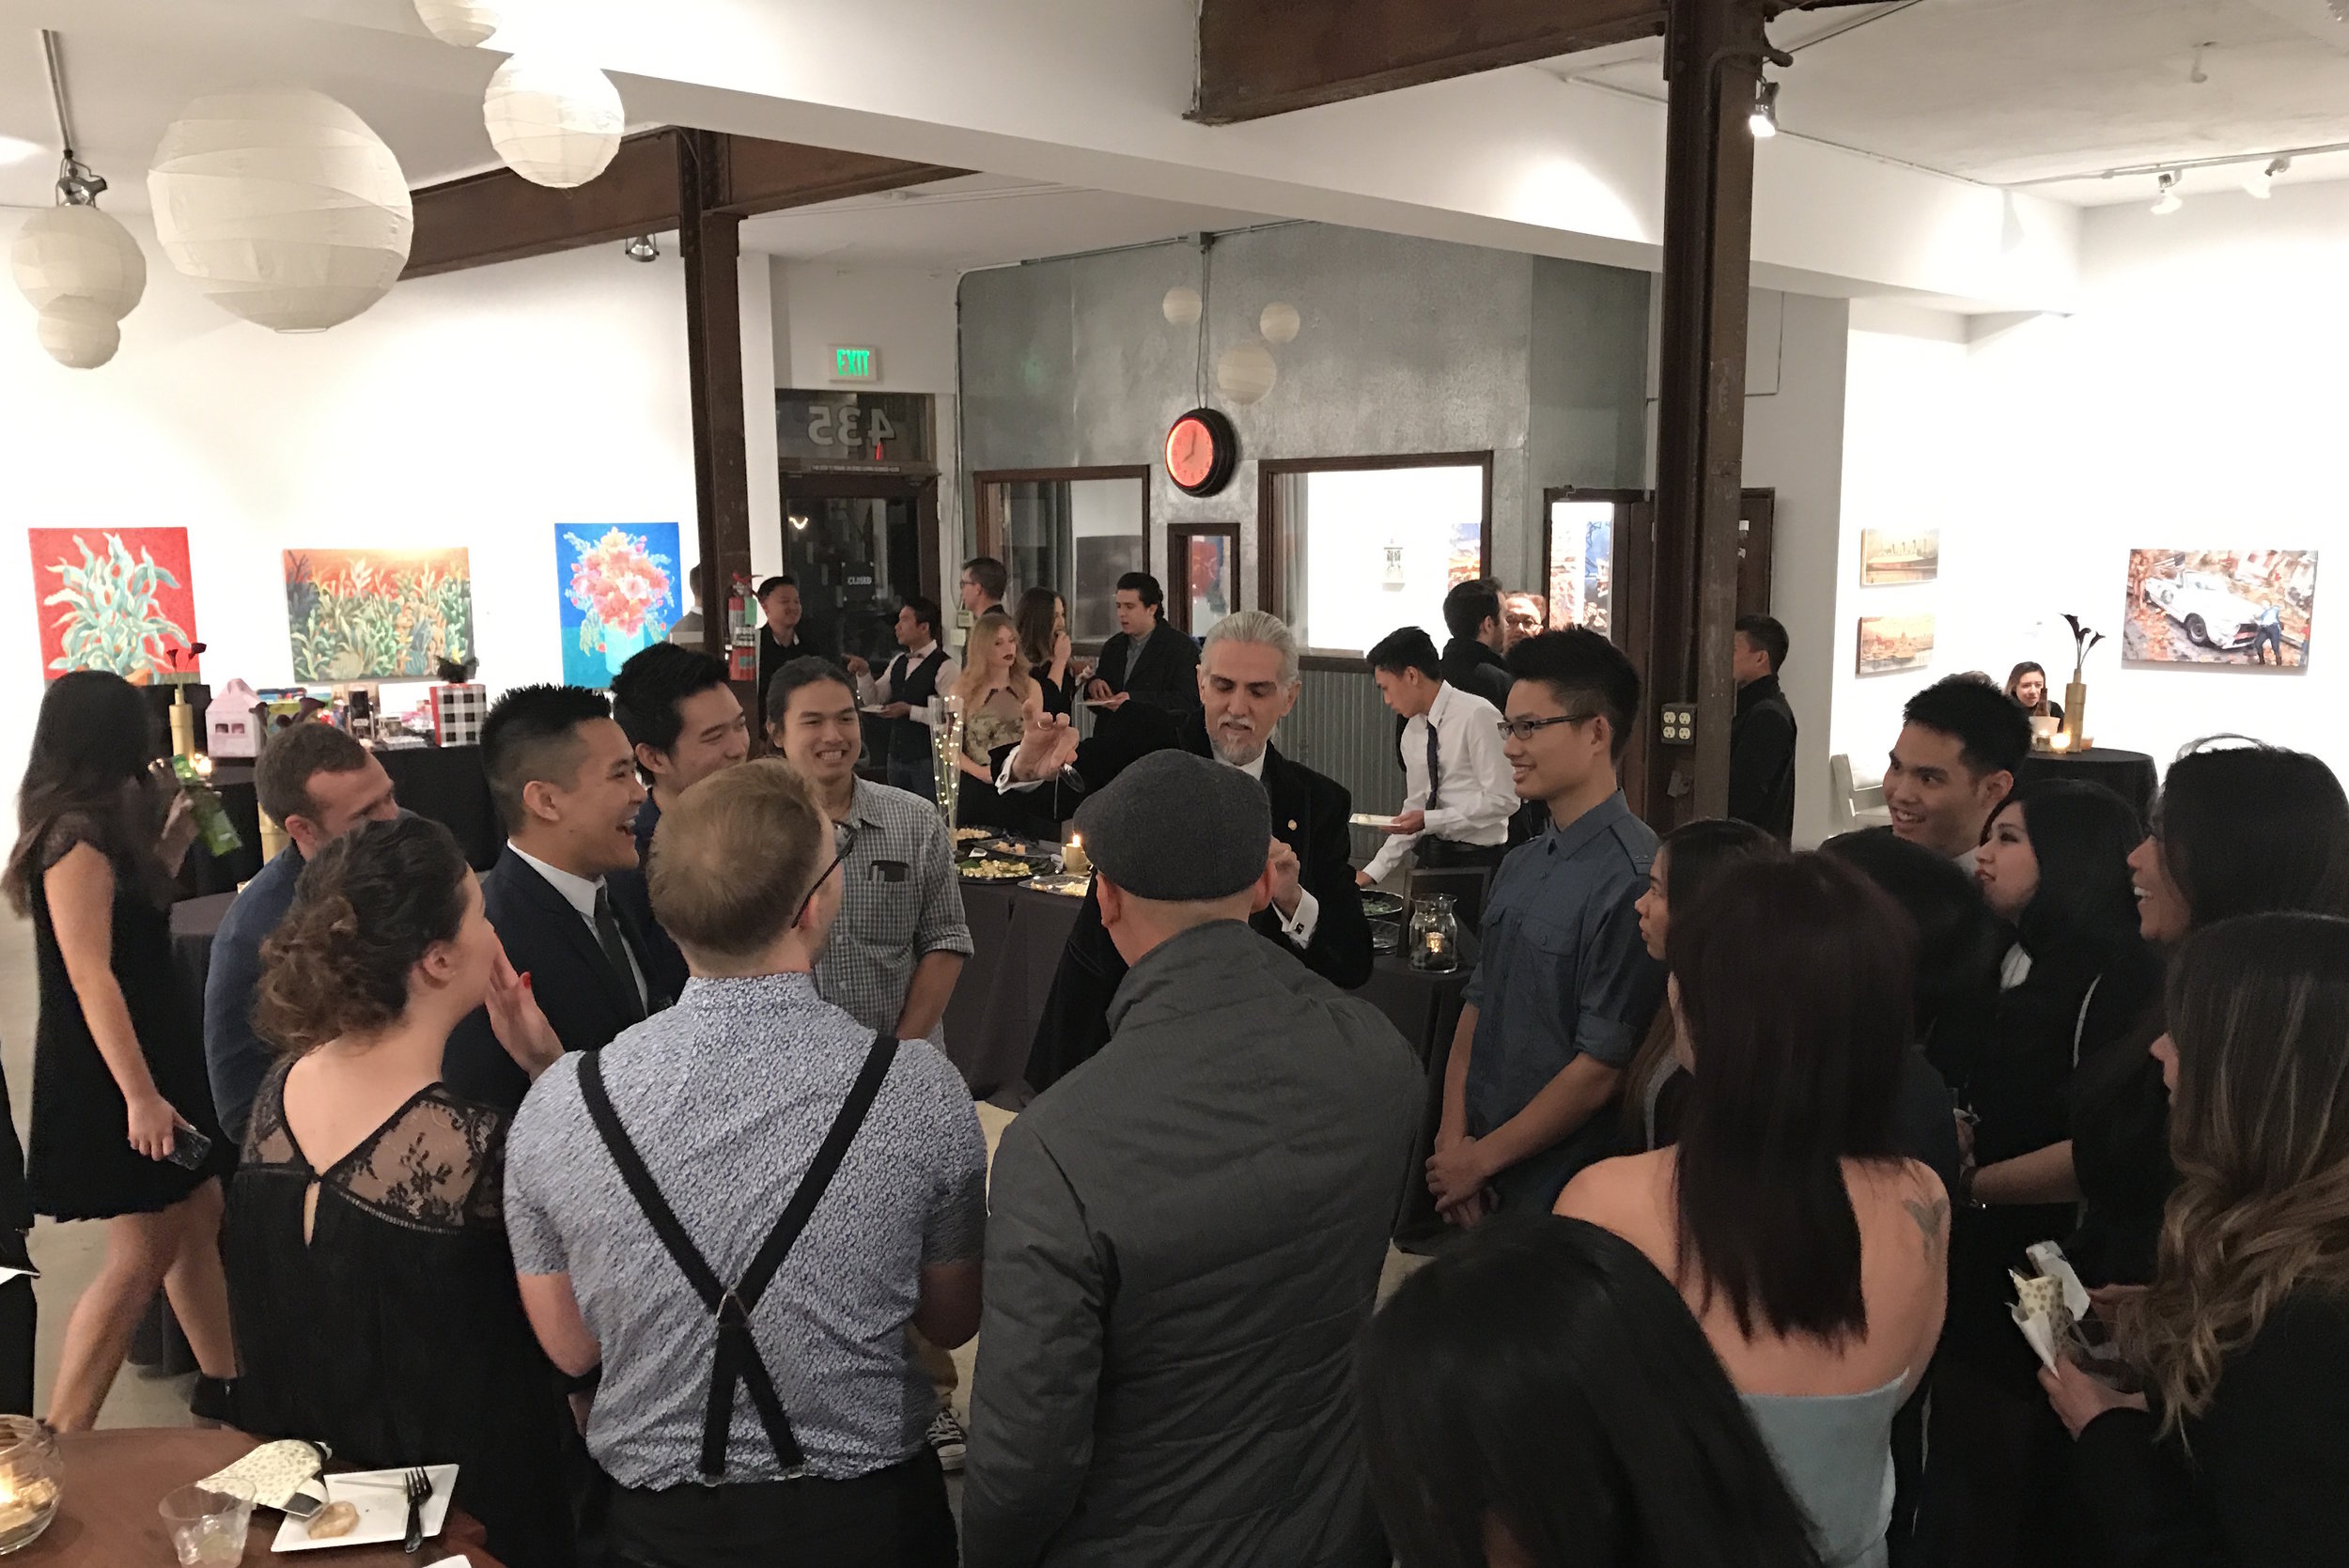  40th Birthday   Venue:  The Liberty Art Gallery &amp; Event Space, Long Beach   Illusionist:  Georges-Robert   Over The Moon Package: &nbsp;Full Design, Planning, &amp; Coordination 